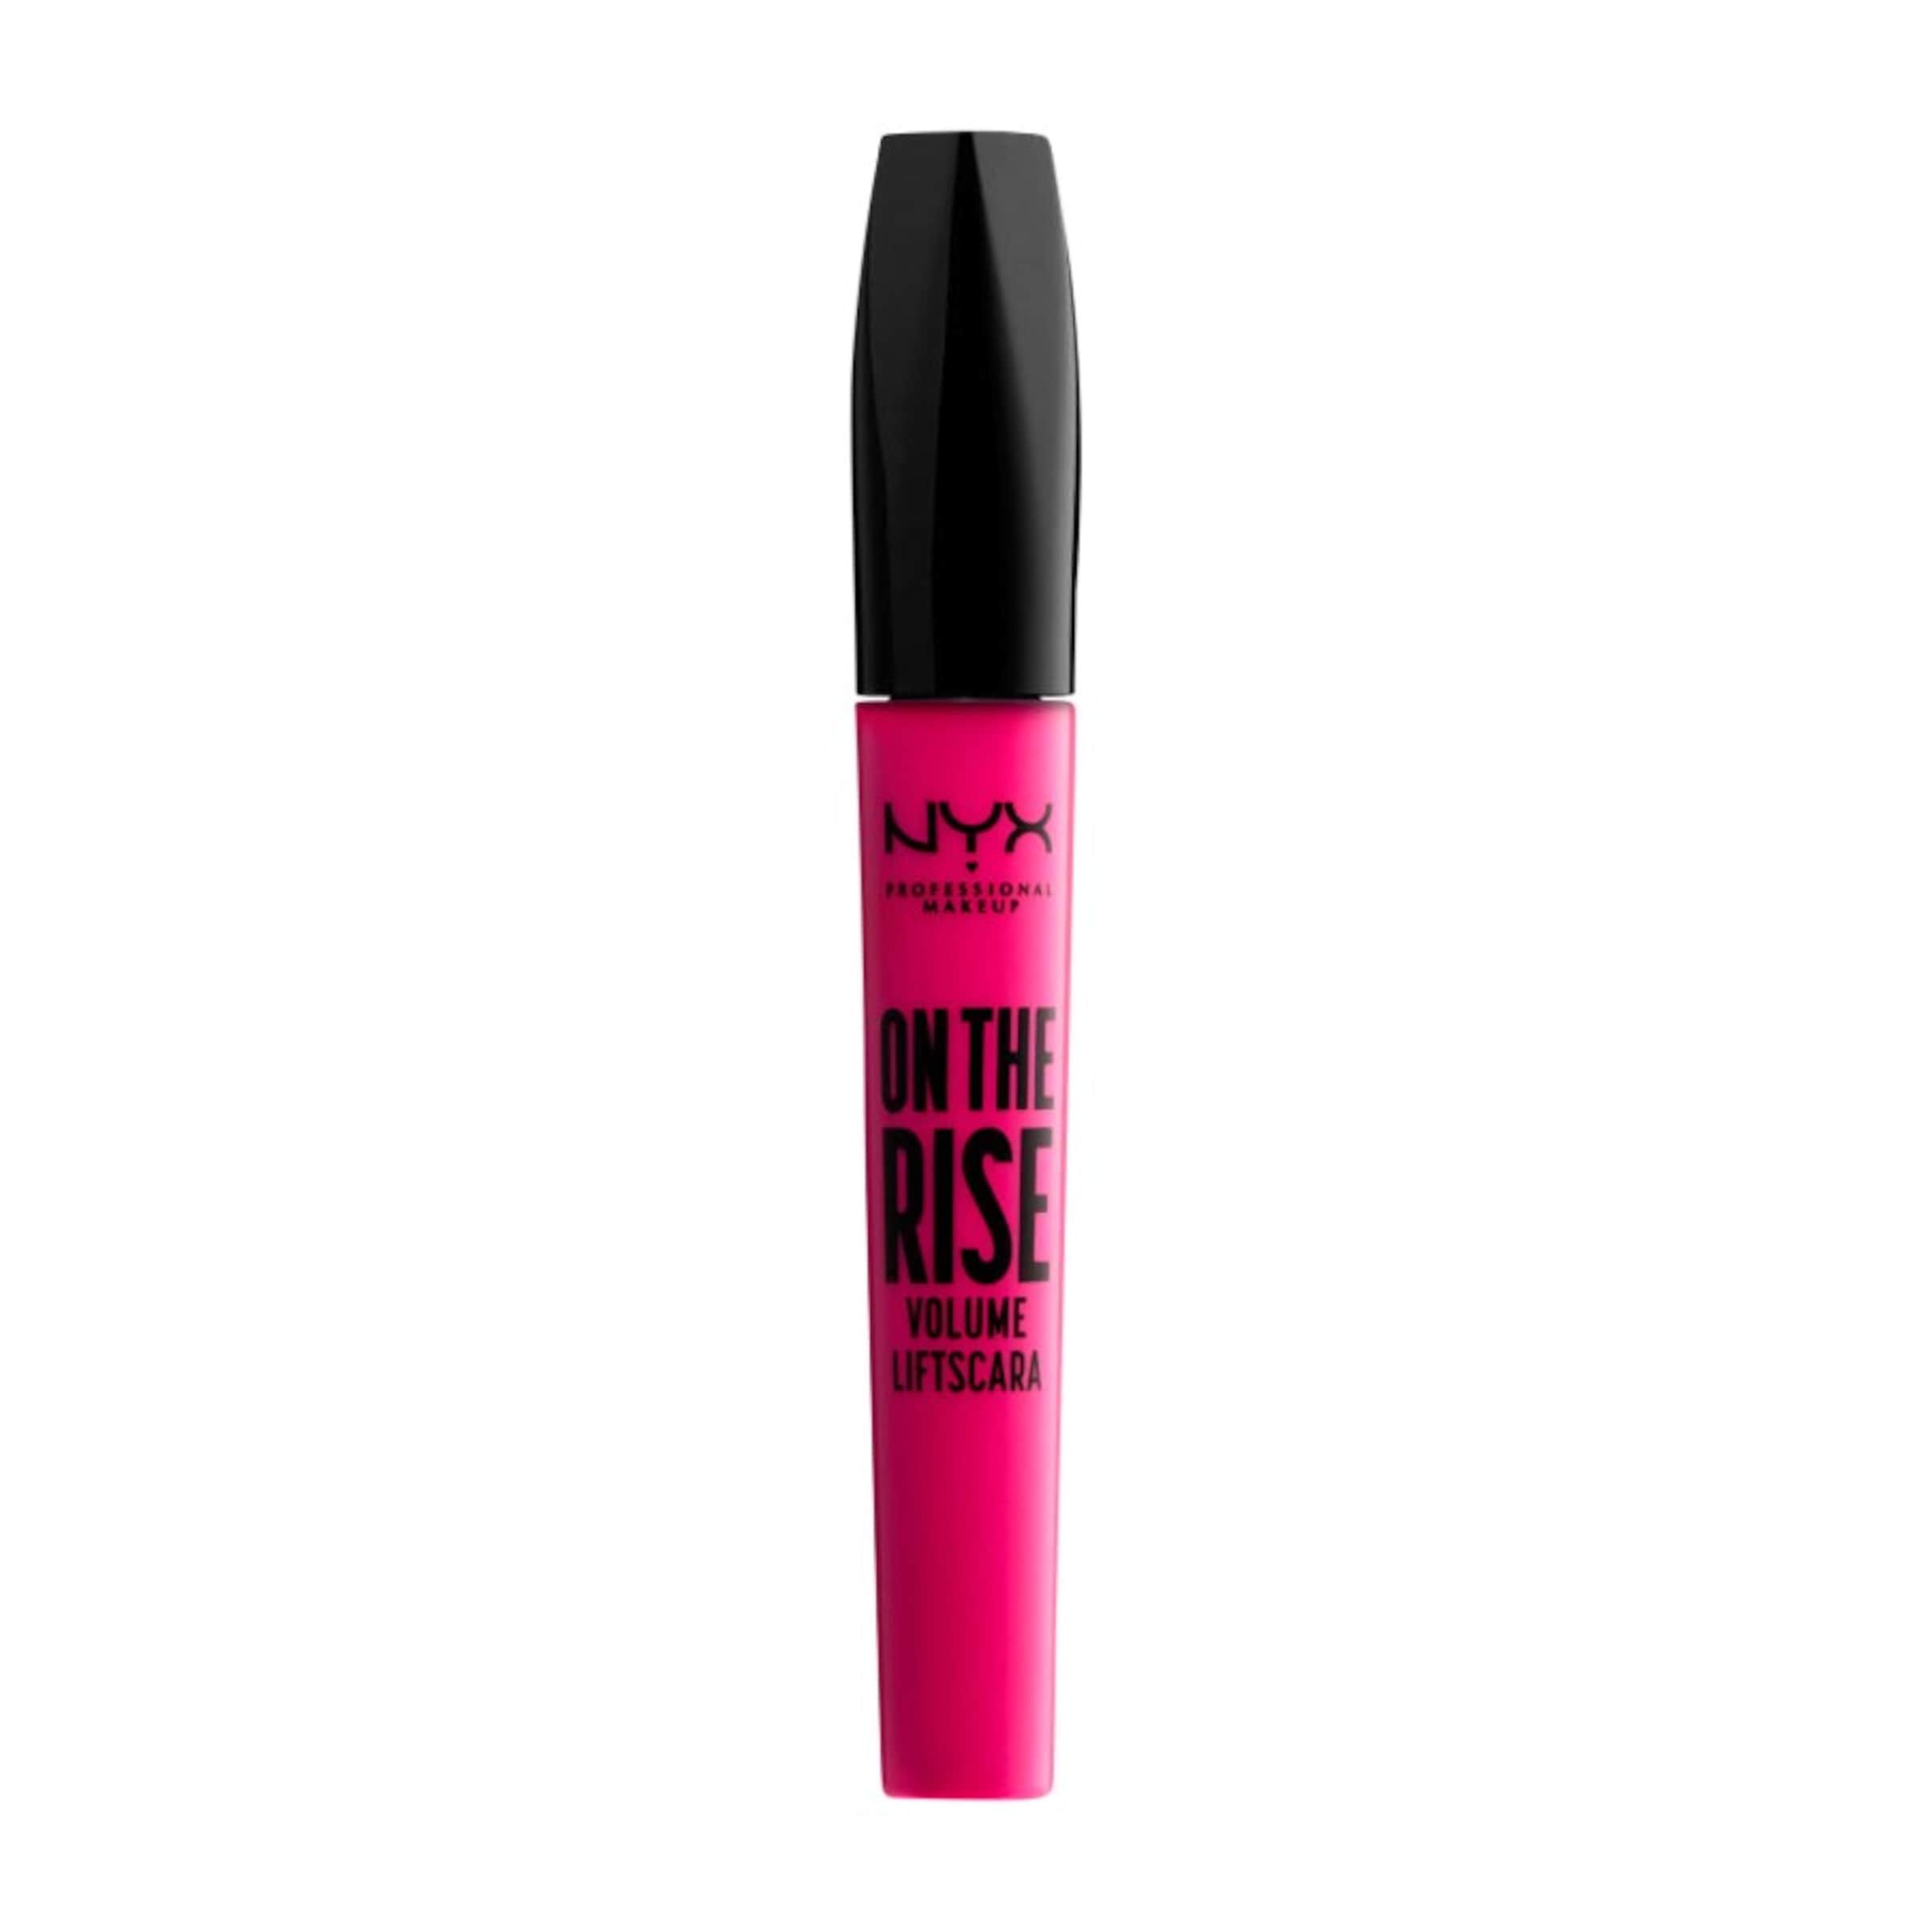 NYX Professional Makeup On the Rise Volume Liftscara Mascara in Pink 